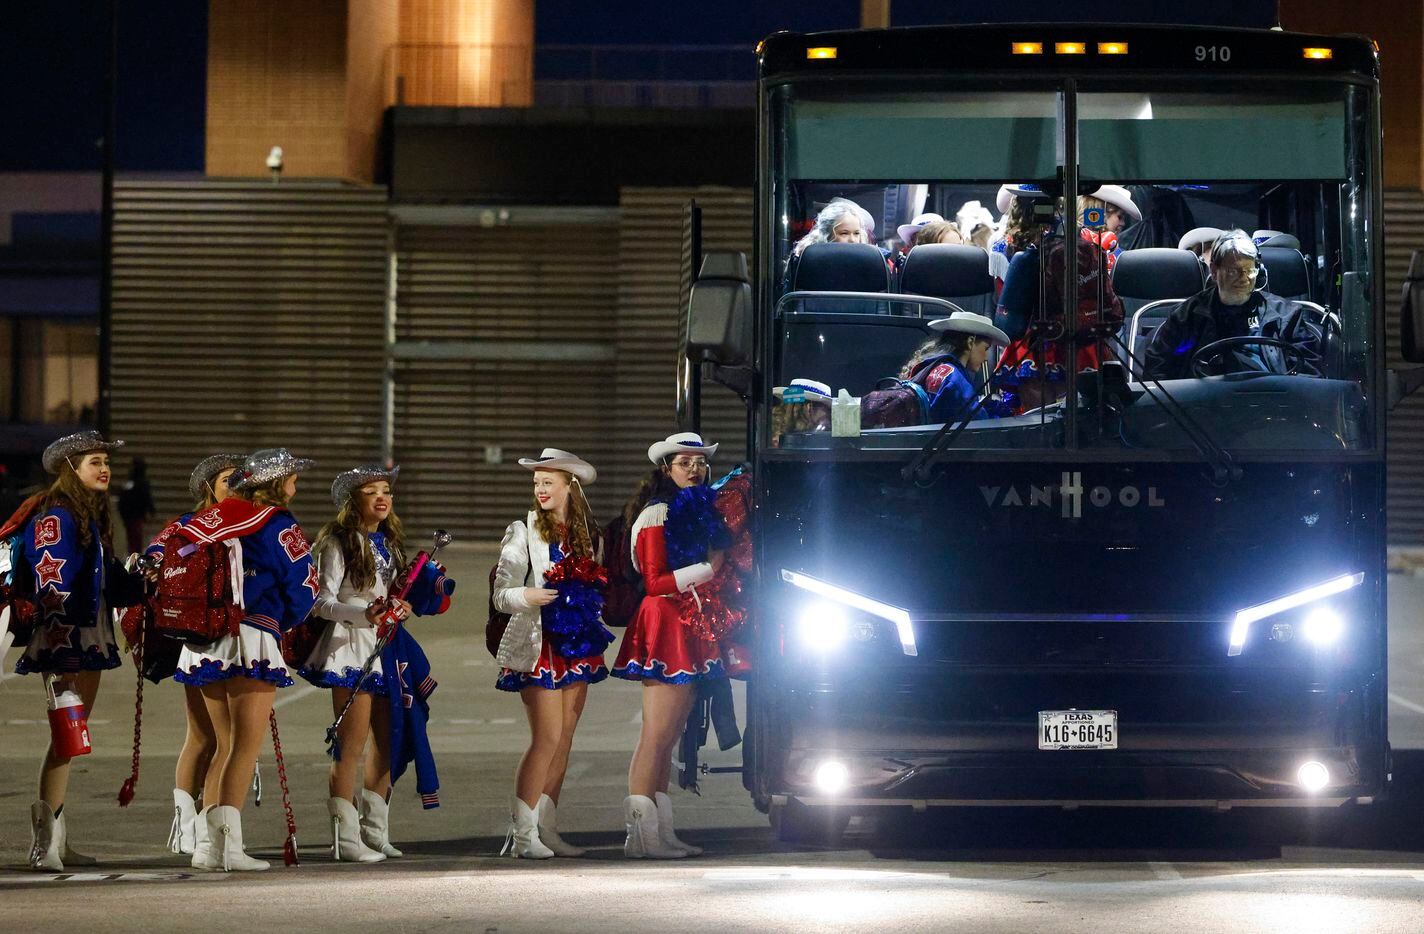 Parish Rosettes members line up to board the bus after performing at their football team’s...